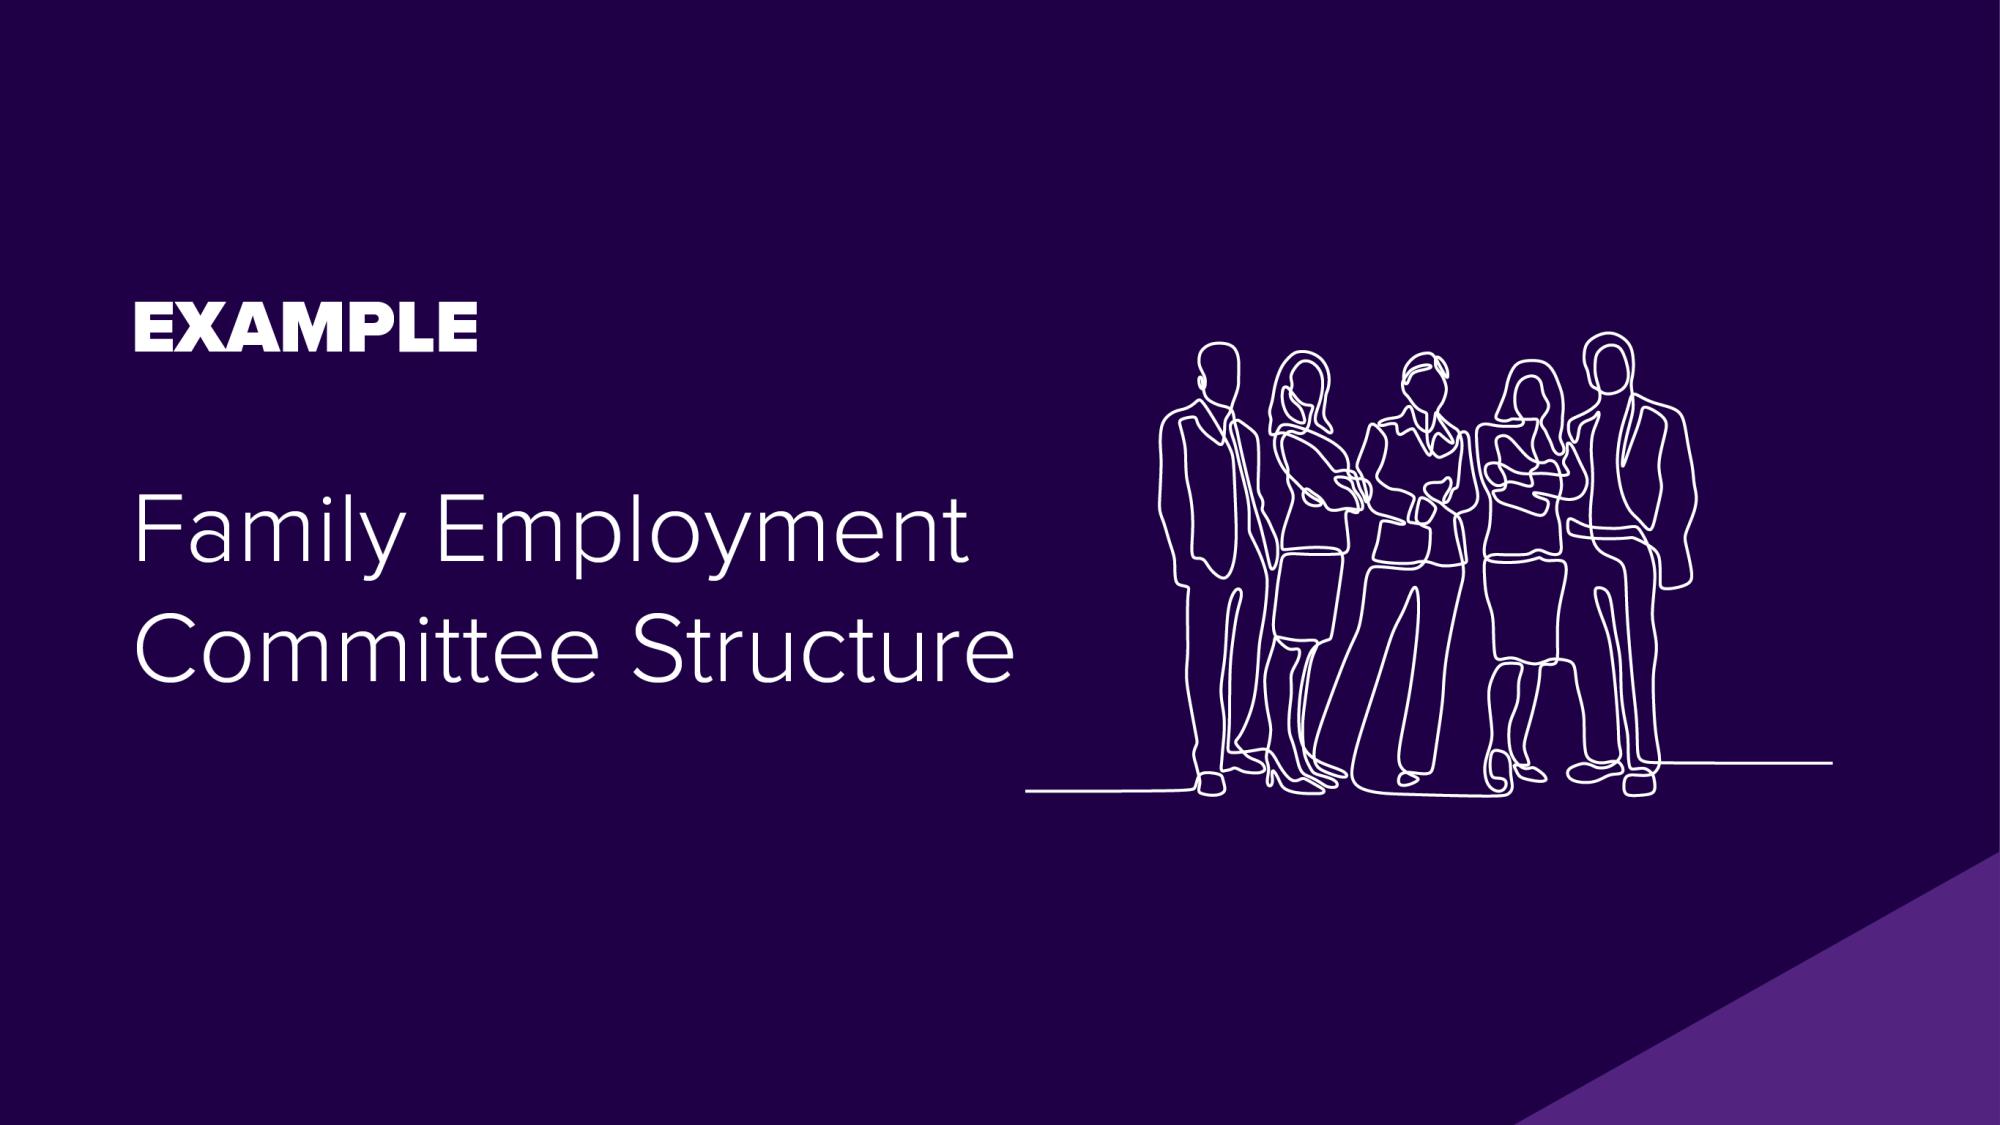 Example: Family Employment Committee Structure